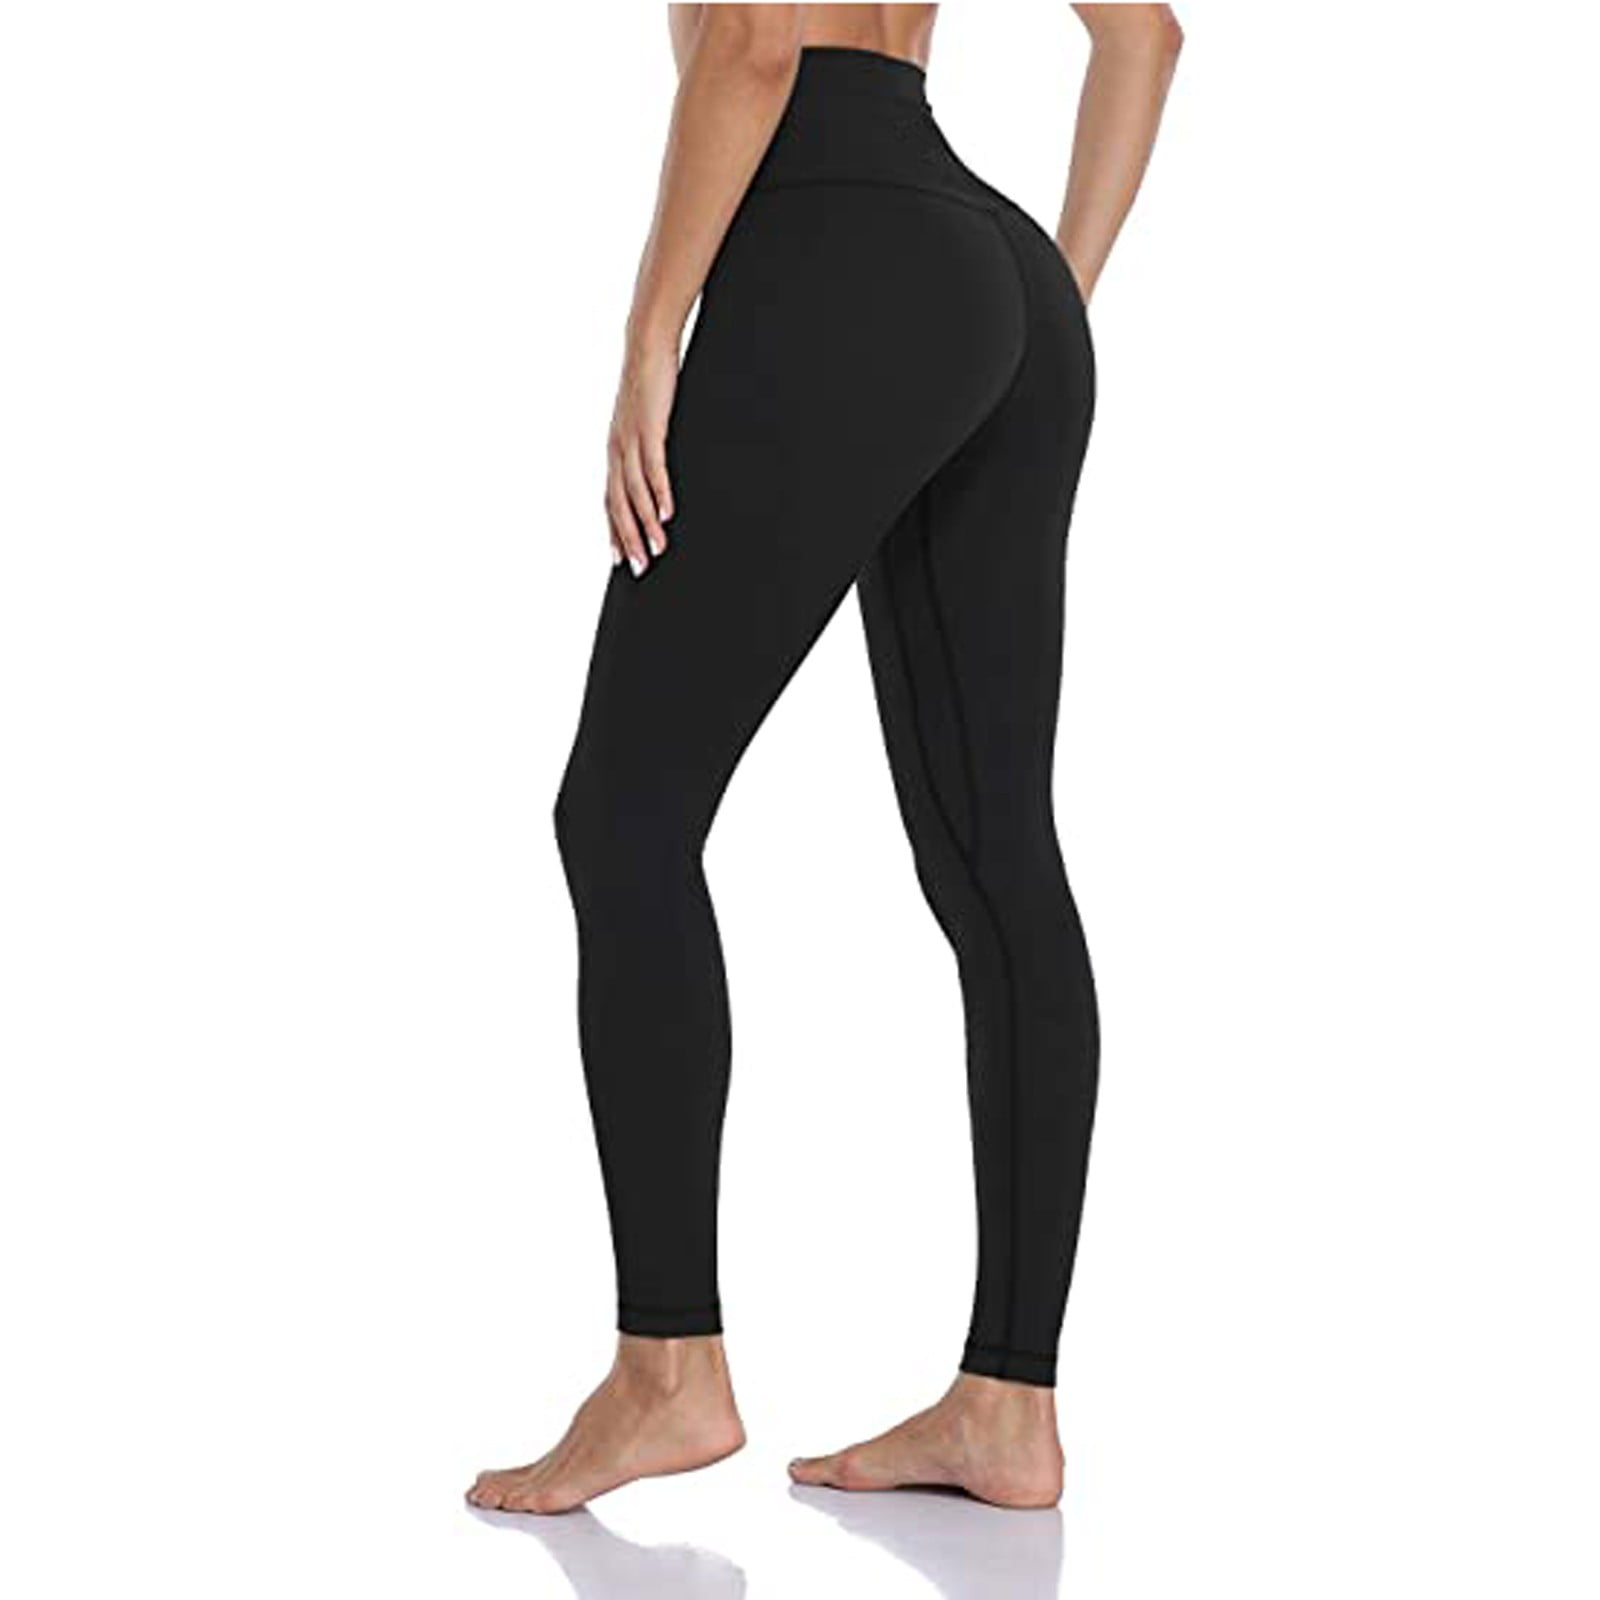 Gubotare Yoga Pants For Women Bootcut Womens Yoga Leggings with  Pockets-High Waist Workout Pants 7/8 Length Stretch Running Jogging Hiking  Cycling Activewear,Black XL 